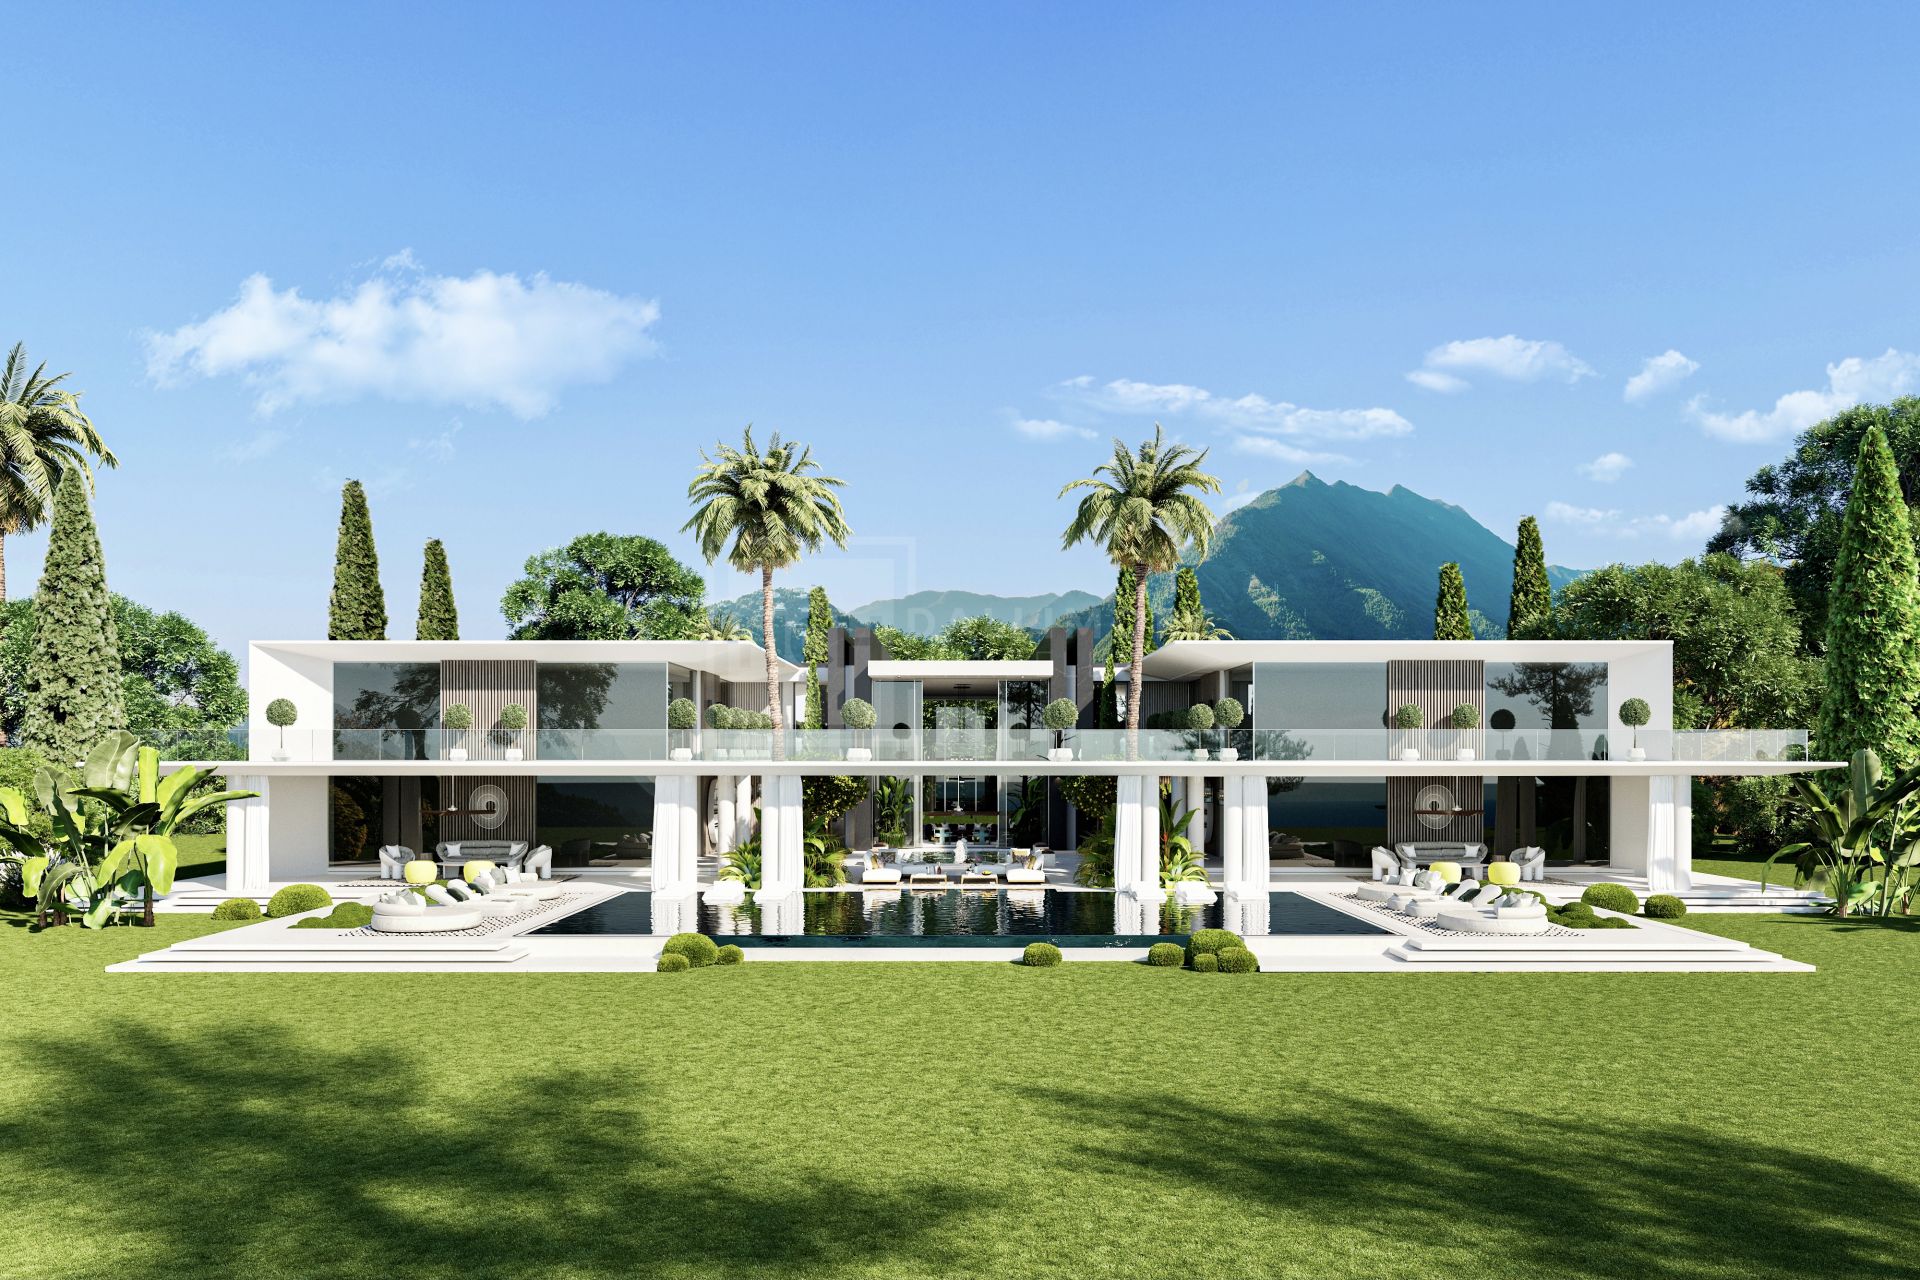 Villa Andaluz, a stunning turnkey project located in the heart of Nueva Andalucia